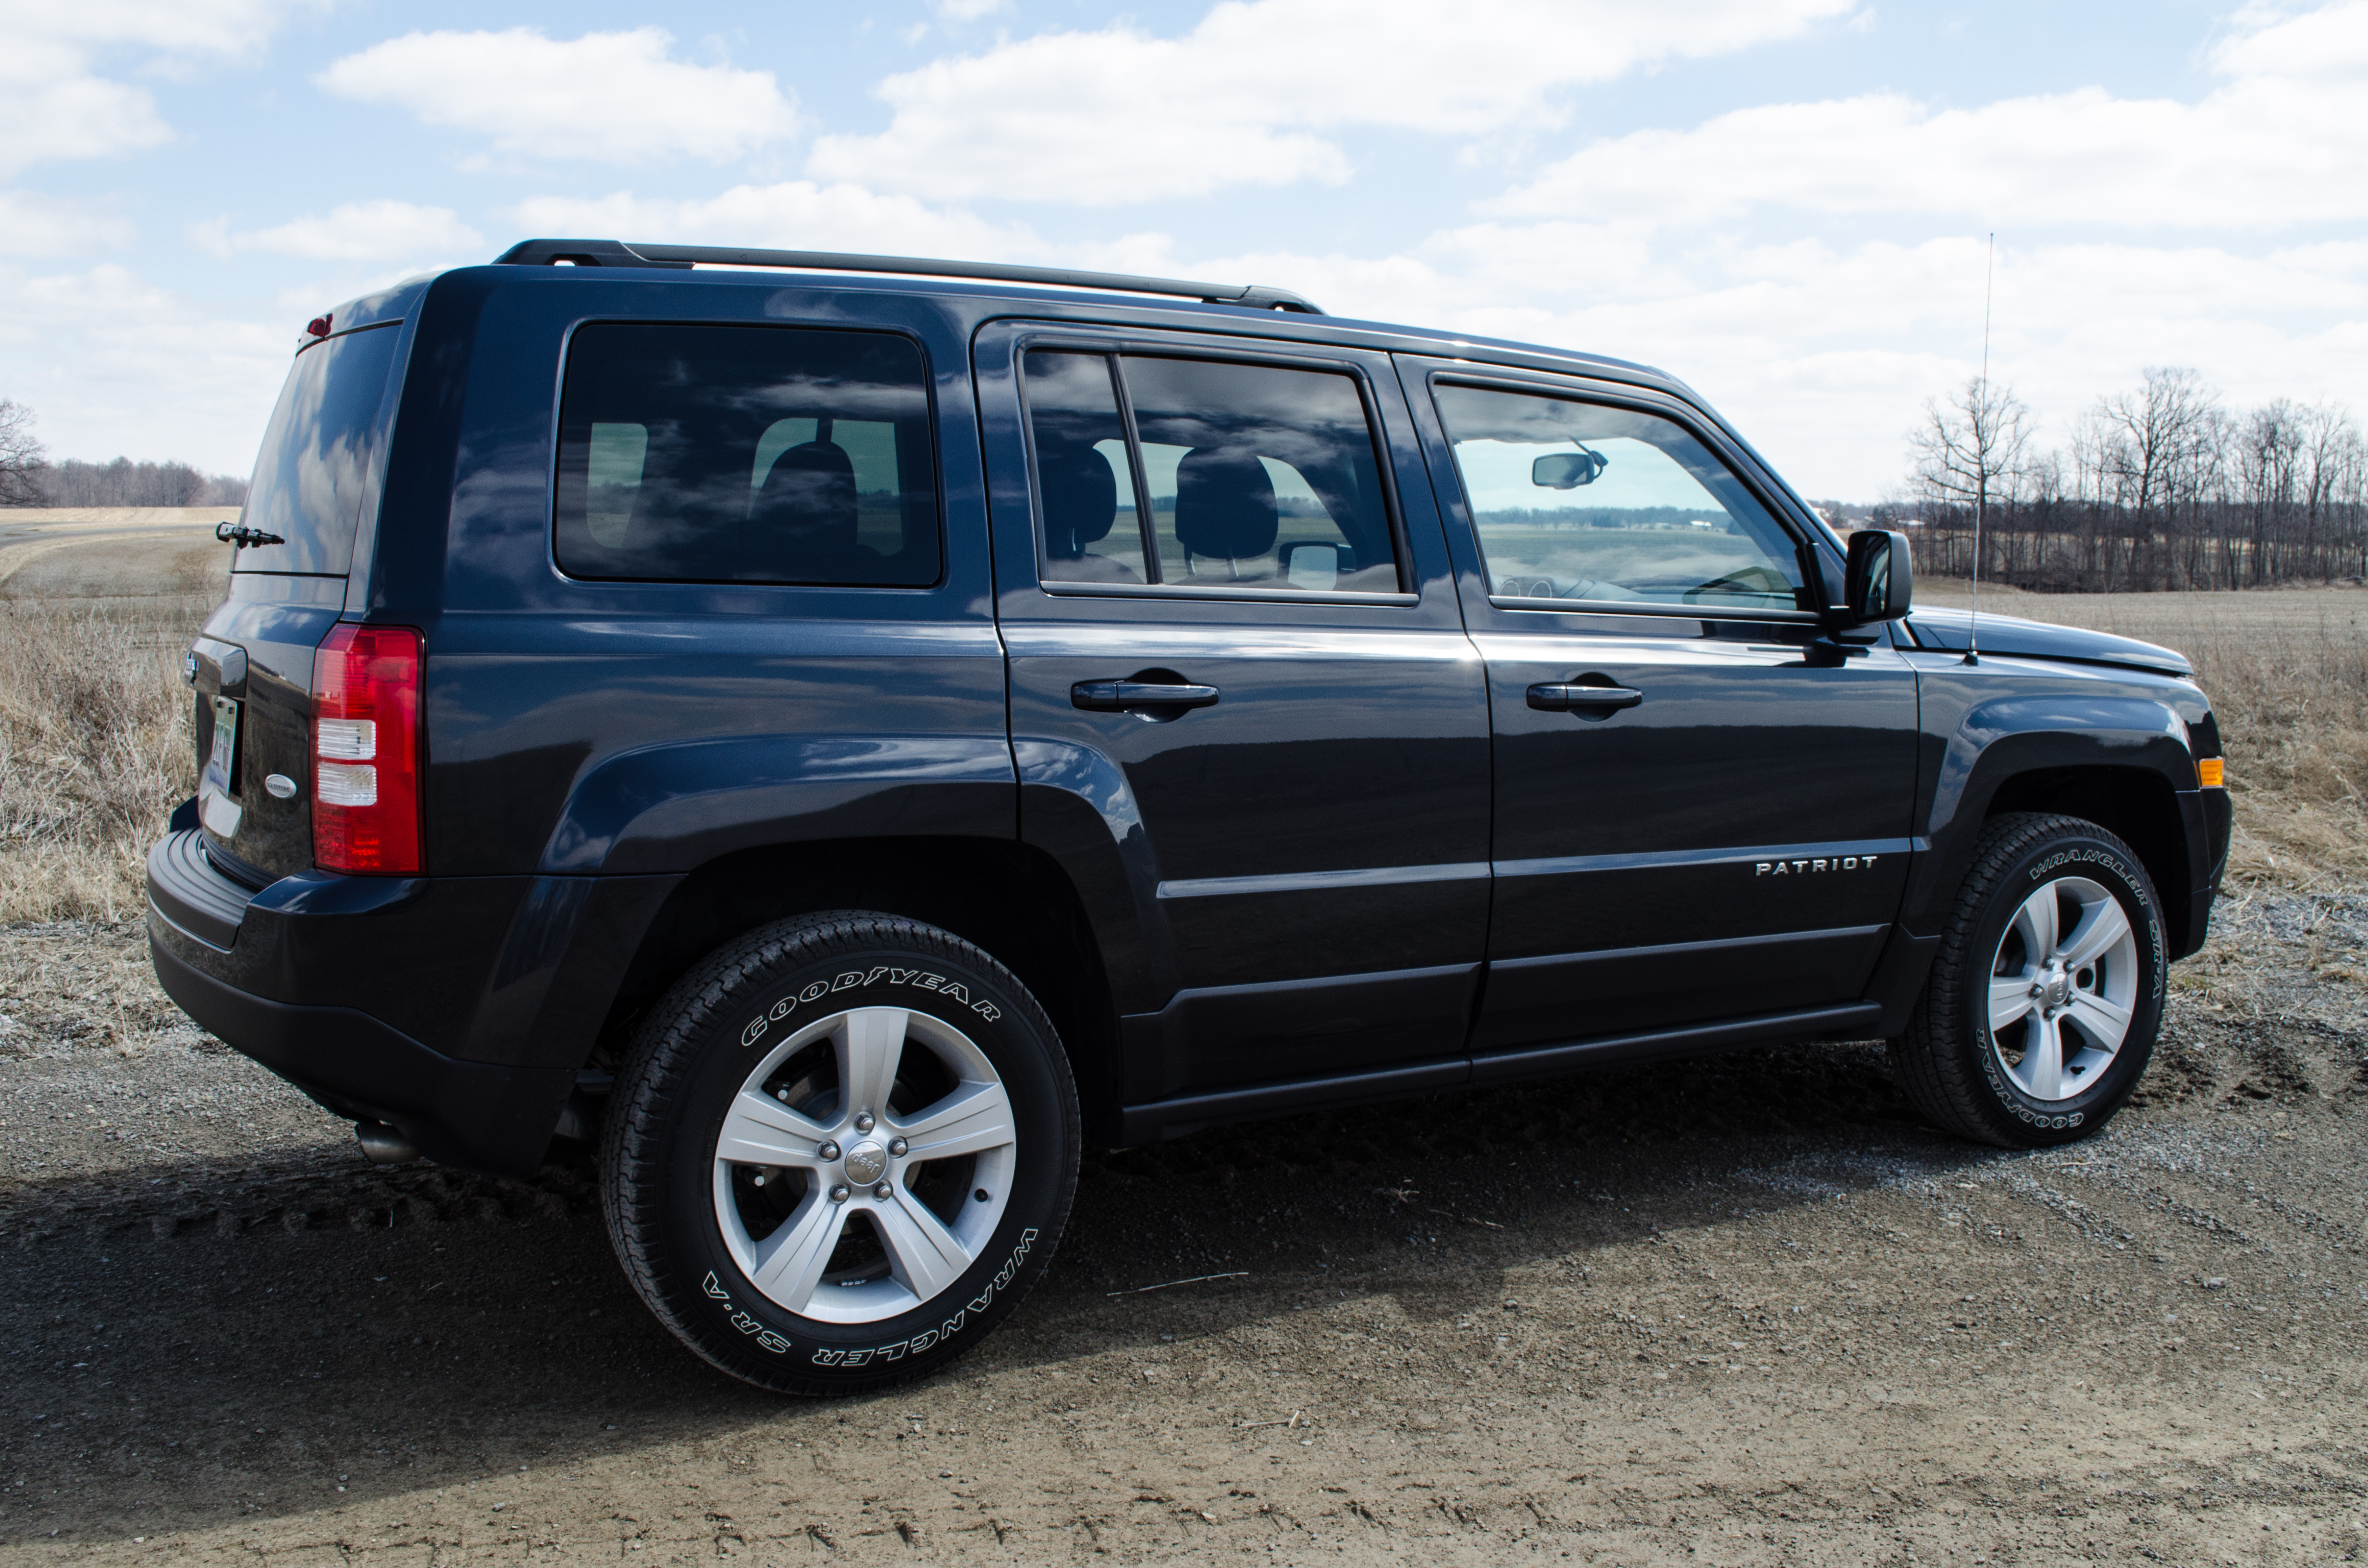 2014 Jeep Patriot Review Is America's Cheapest SUV a